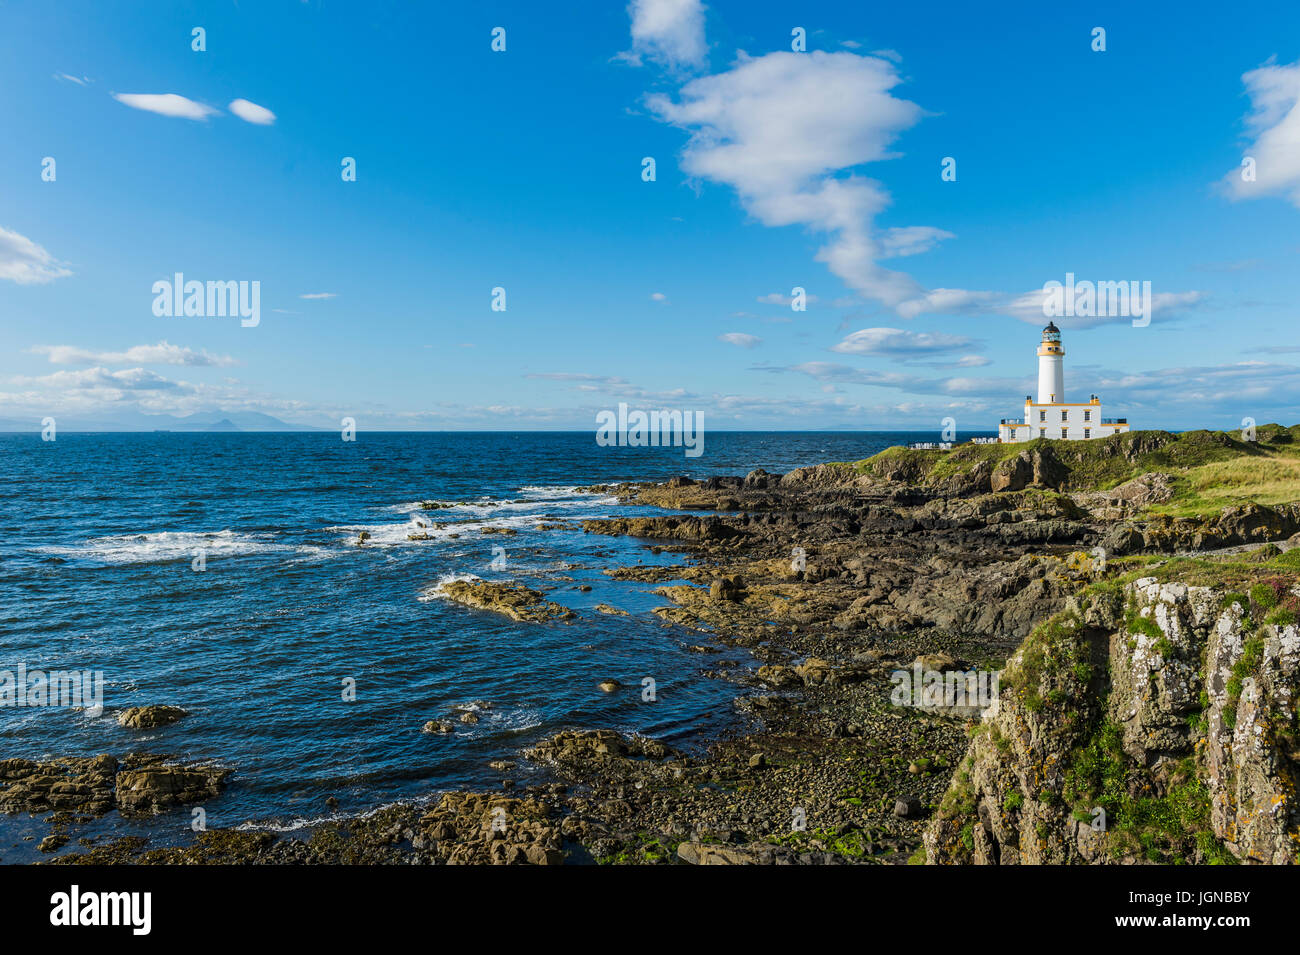 Turnberry, Scotland, UK - August 4, 2016: The old lighthouse at Turnberry which is now part of the Trump Turnberry Luxury Resort hotel. Stock Photo